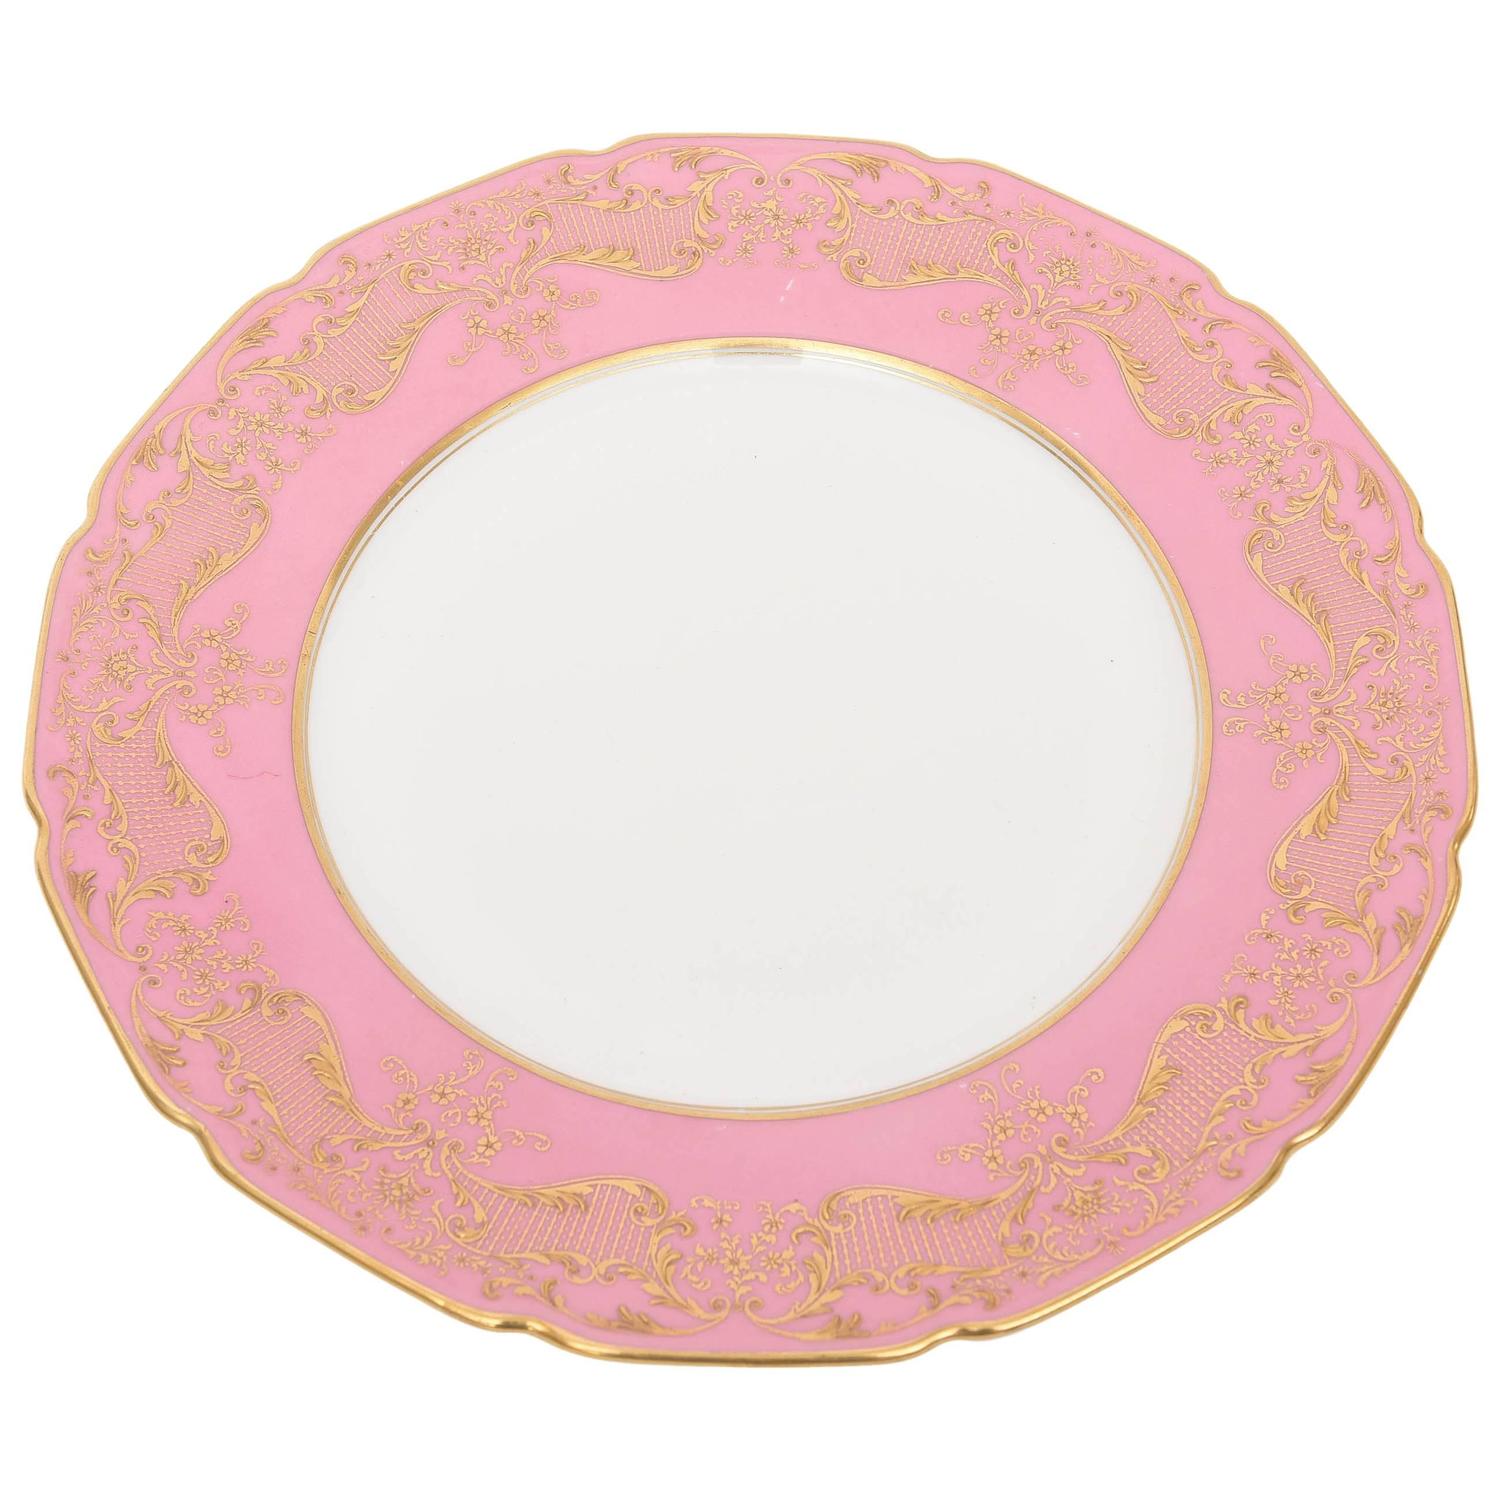 12 Antique Dinner Plates with Raised Gold on Pink, Royal Doulton, England  at 1stDibs | pink and gold dinner plates, royal doulton plates with gold  trim, antique royal doulton dinner sets